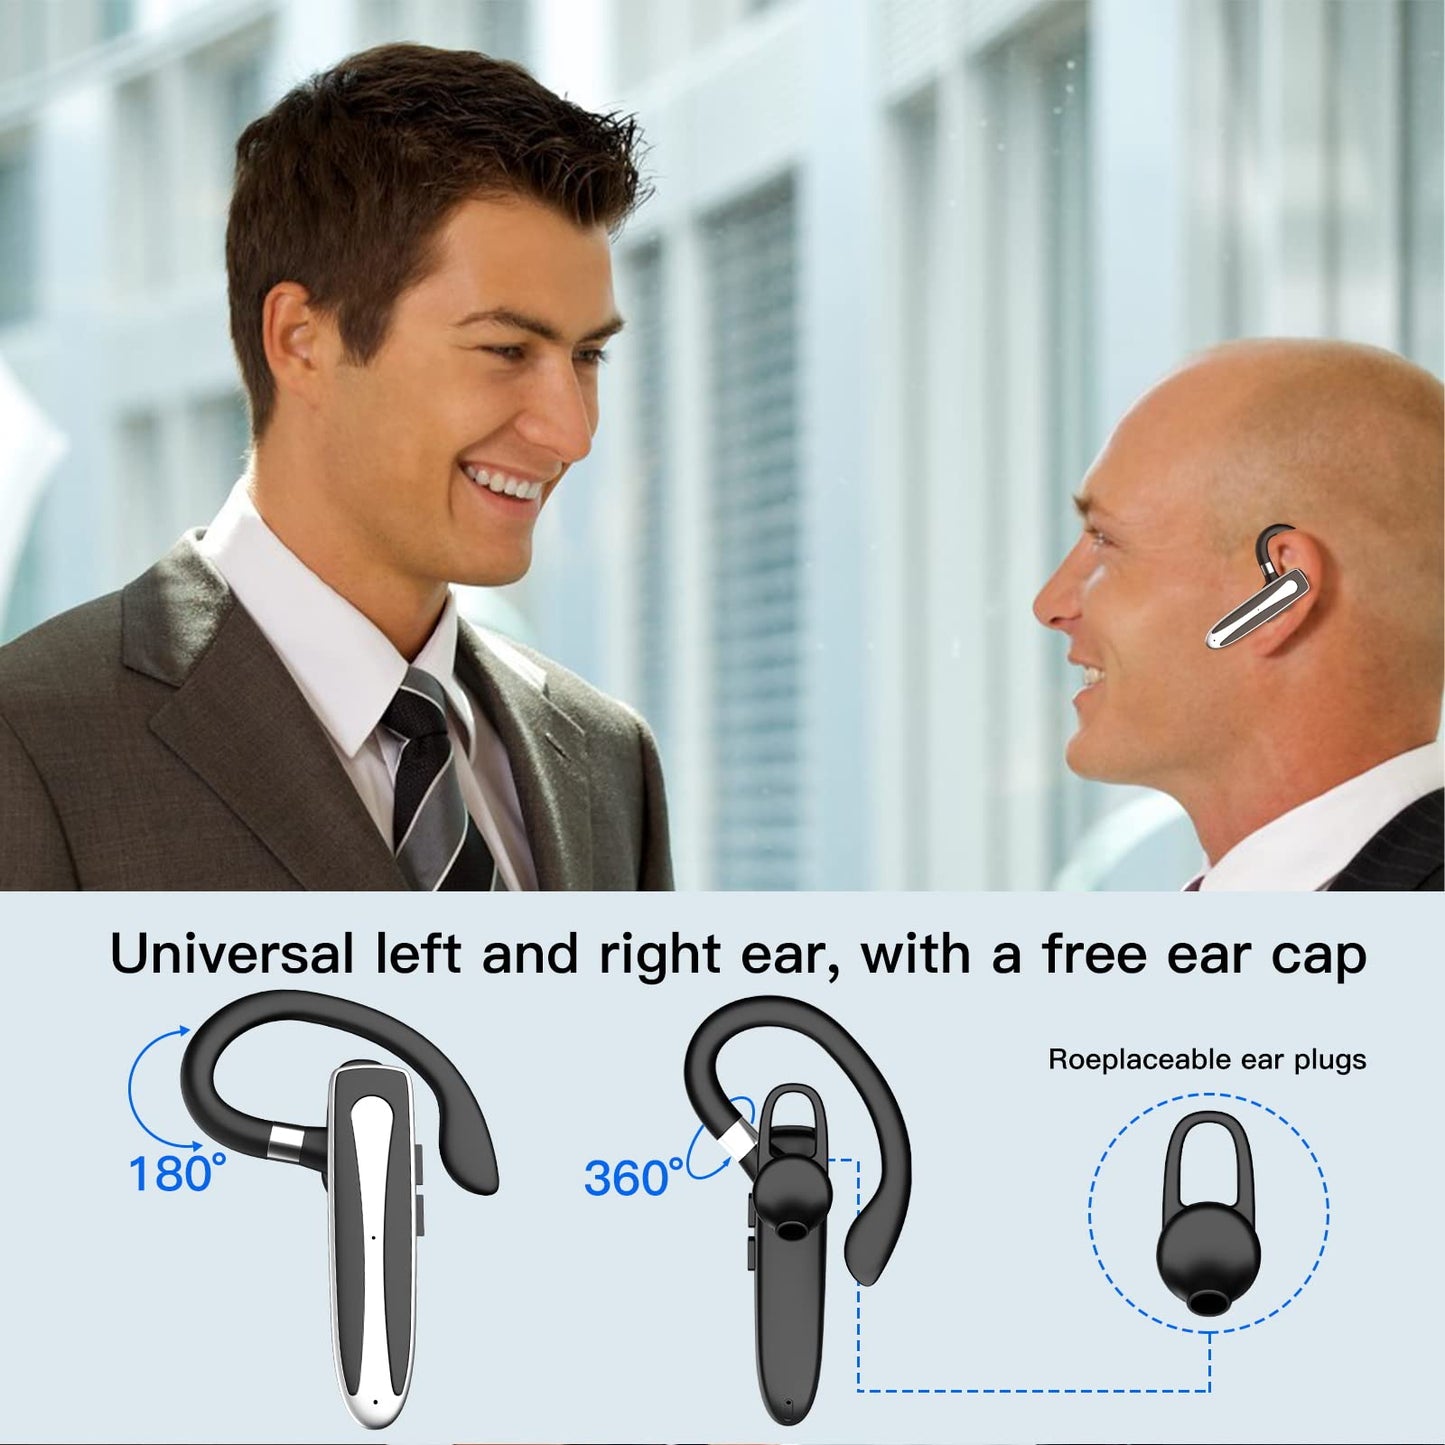 Bluetooth Headset for Cell Phone, Wireless Bluetooth 5.1 Earpiece Single-Ear Headset Hands-Free Earphones,in Mic with Charging Case, for Office Driving Calling Compatible Android/iPhone.